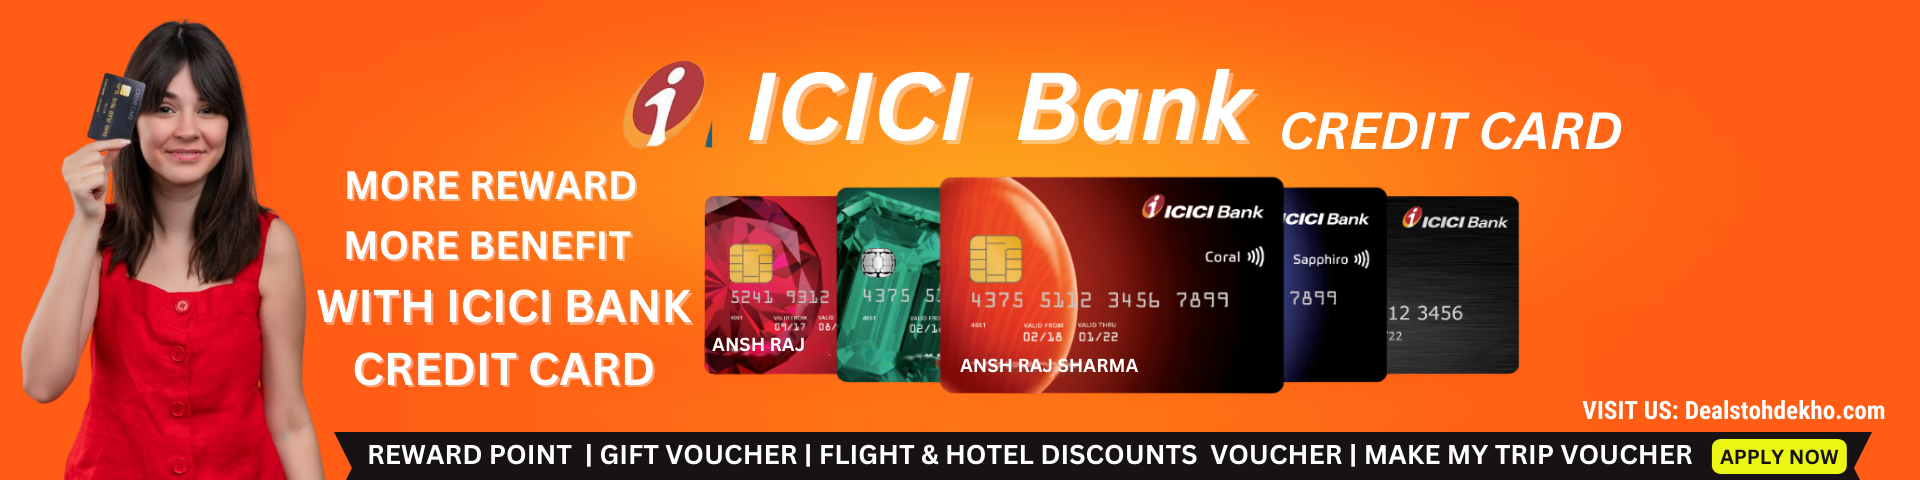 get instant online approval for icici credit card